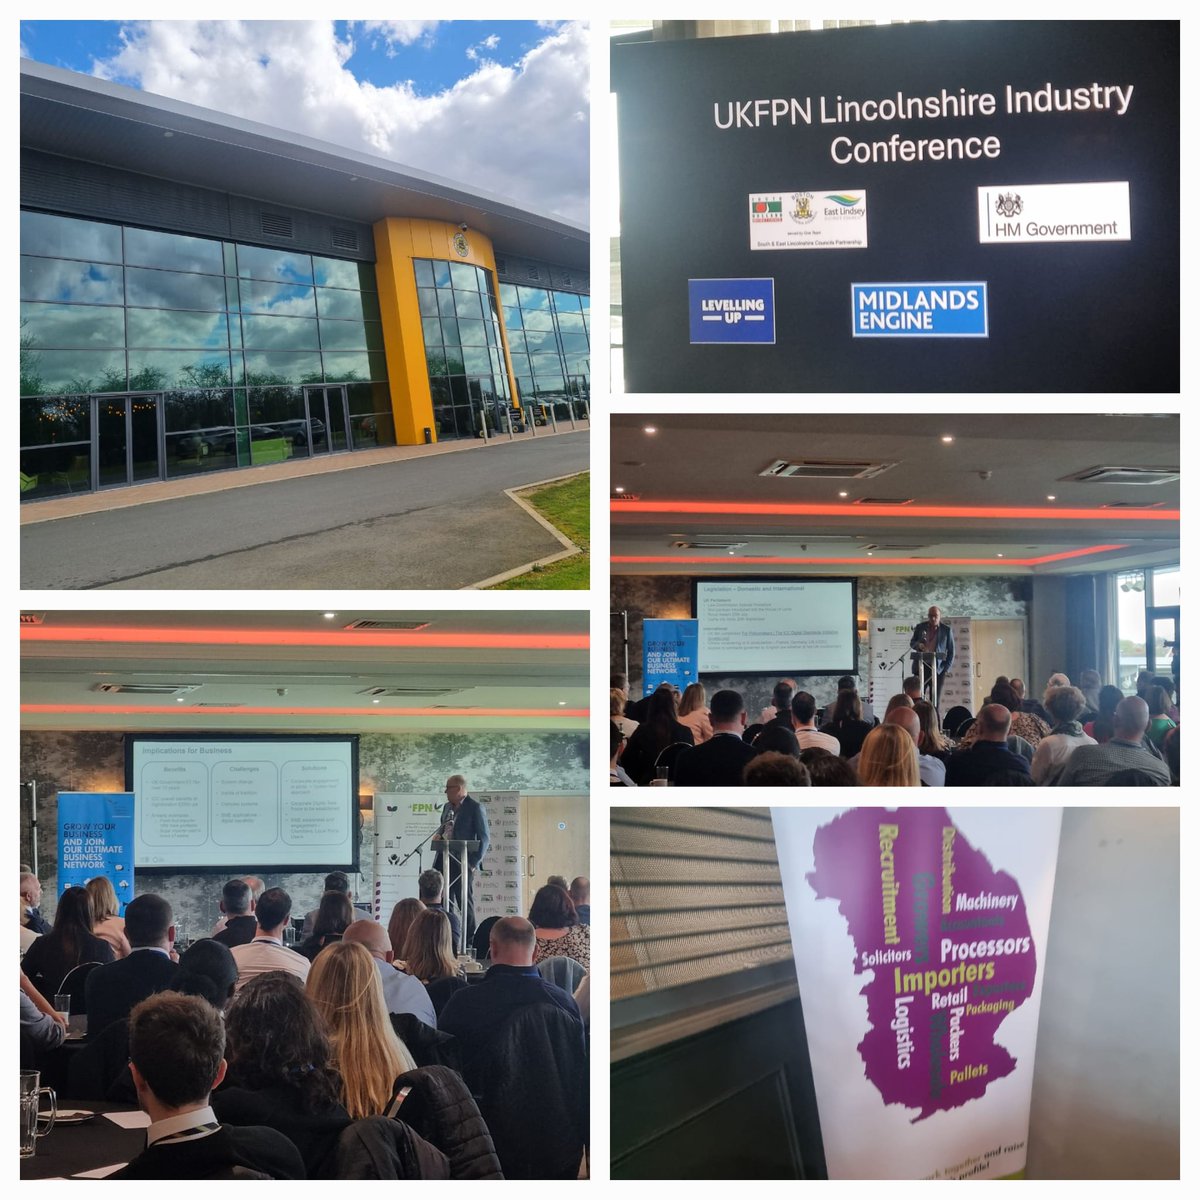 Our BD Manager, Jayne Southall is at the UK FPN Lincolnshire Industry Conference today, learning all things technology and trade. If you're there, say hi! #FPN #FreshProduceNetwork #Commercial #UKConstruction @lincscham @jamesalexkirby @purdy5tl @TonyLawt @ShowgDirector